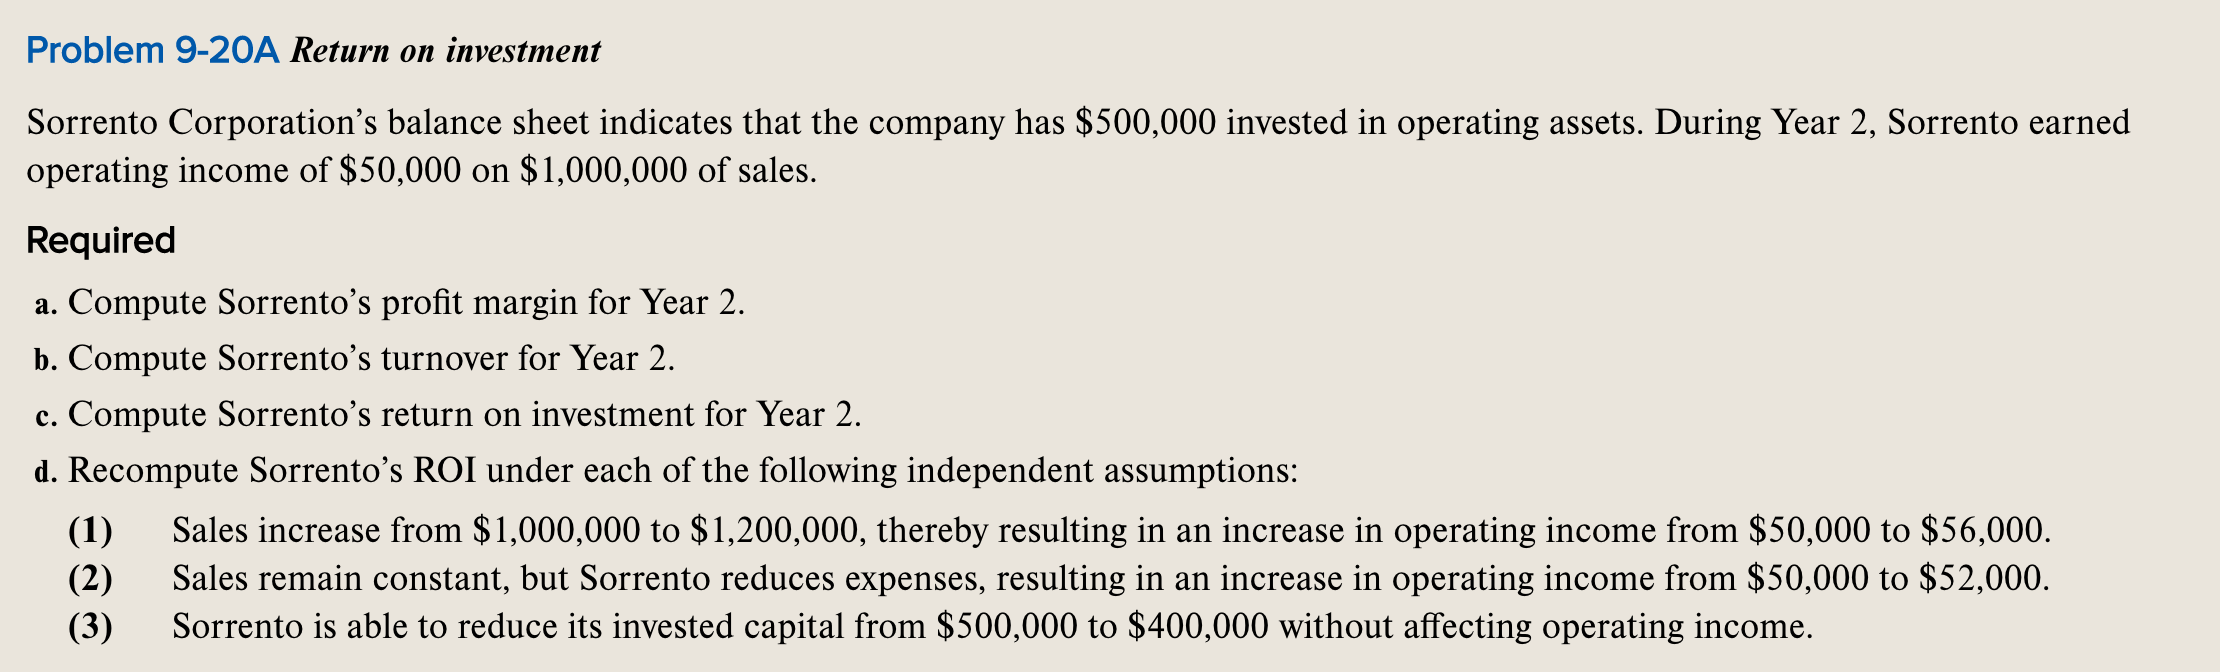 Problem 9-20A Return on investment
Sorrento Corporation's balance sheet indicates that the company has $500,000 invested in operating assets. During Year 2, Sorrento earned
operating income of $50,000 on $1,000,000 of sales.
Required
a. Compute Sorrento's profit margin for Year 2.
b. Compute Sorrento's turnover for Year 2.
c. Compute Sorrento’s return on investment for Year 2.
d. Recompute Sorrento’s ROI under 

<div class=